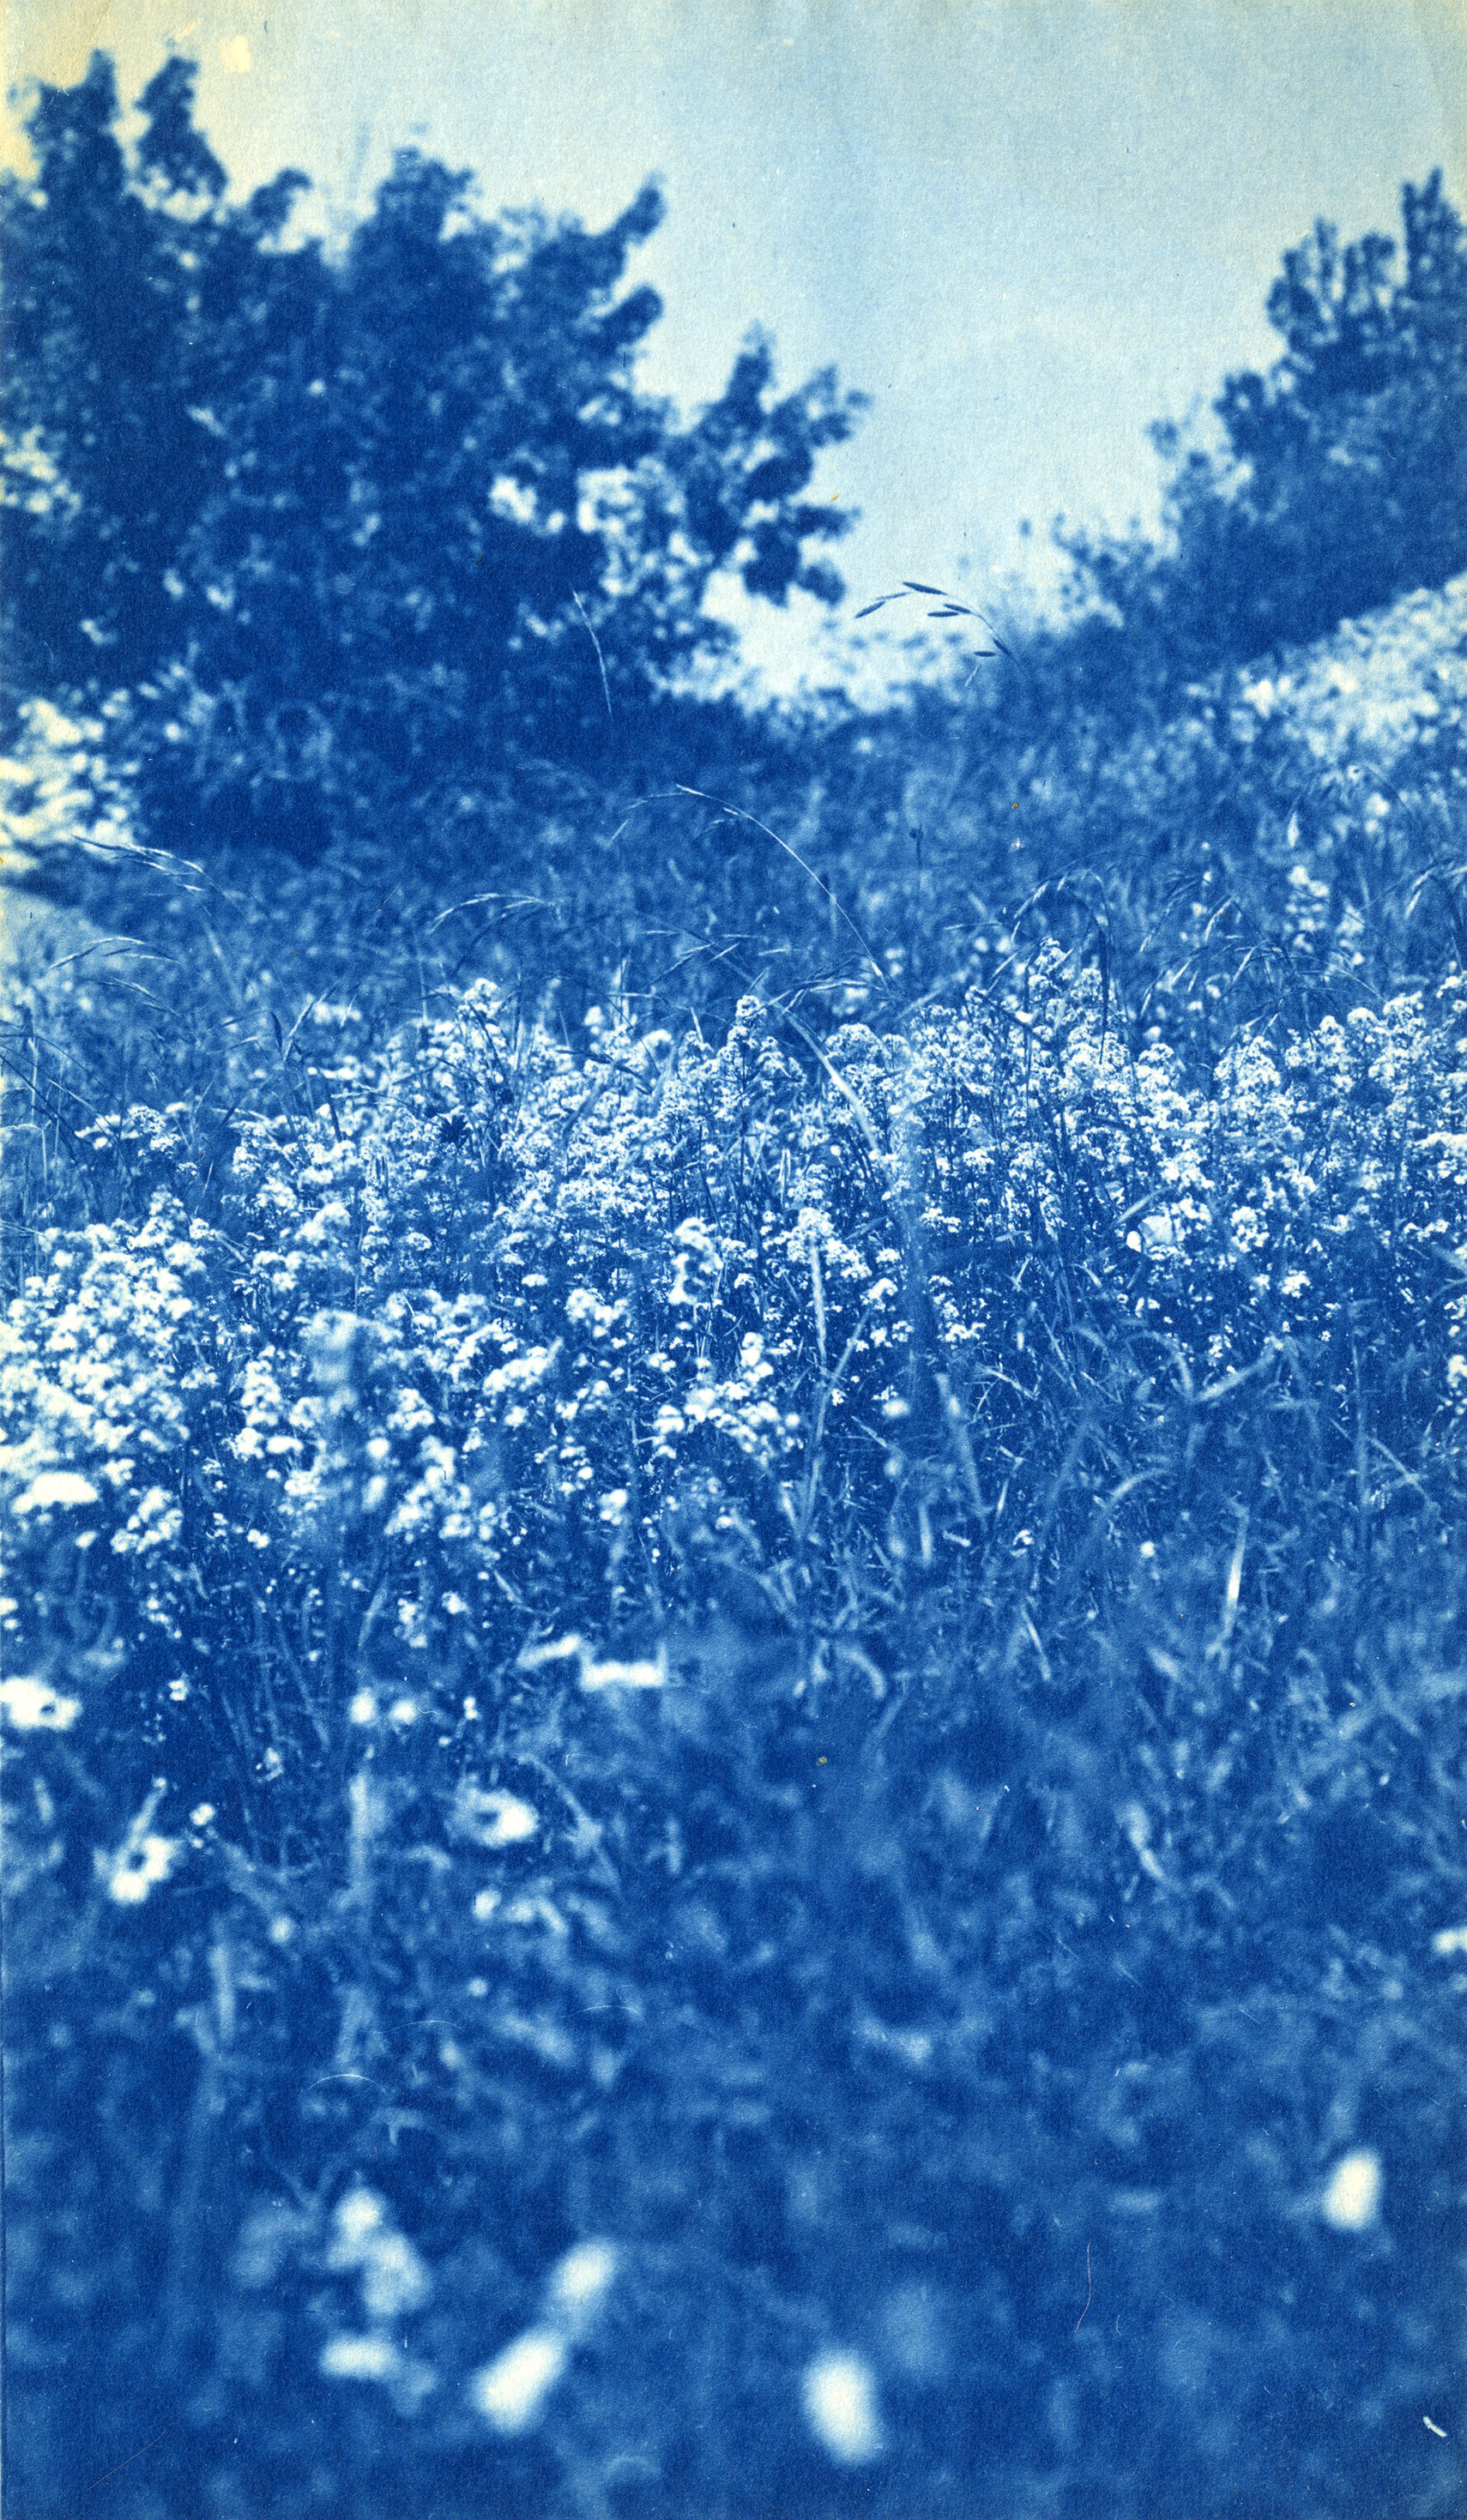 What in the World is a Cyanotype?